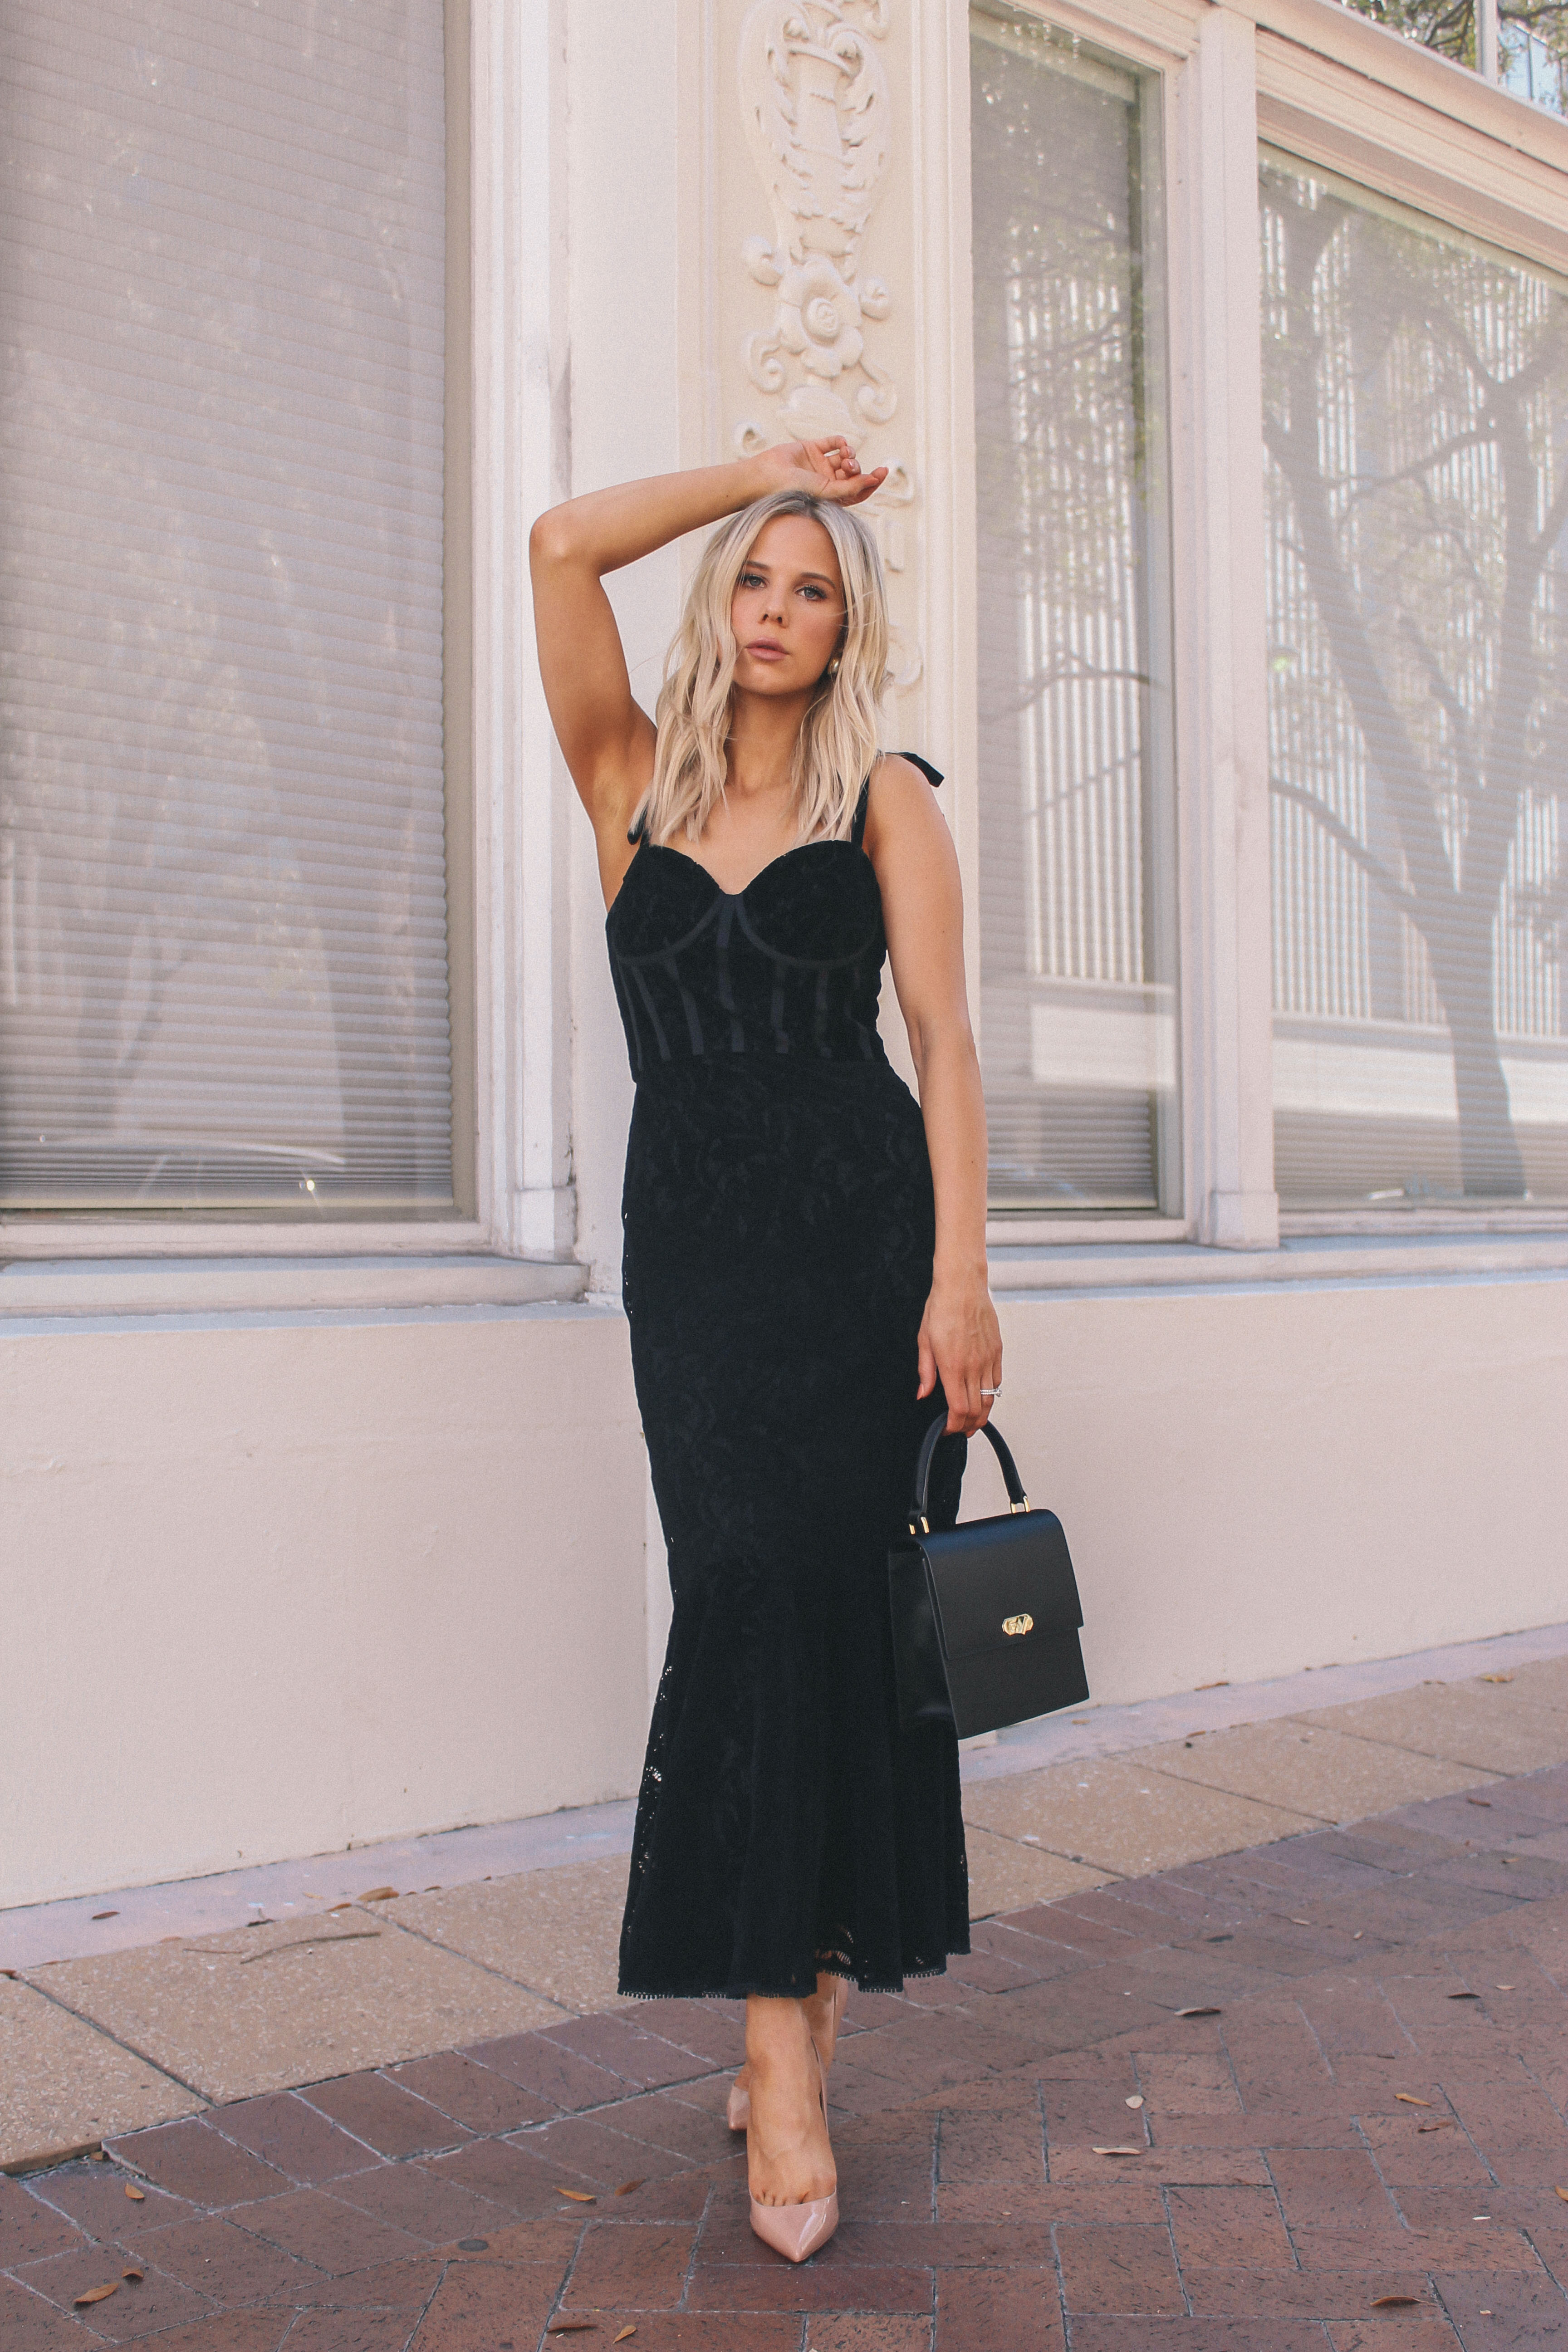 how to find the perfect little black dress, little black dress, lbd, #littleblack dress #blackdress